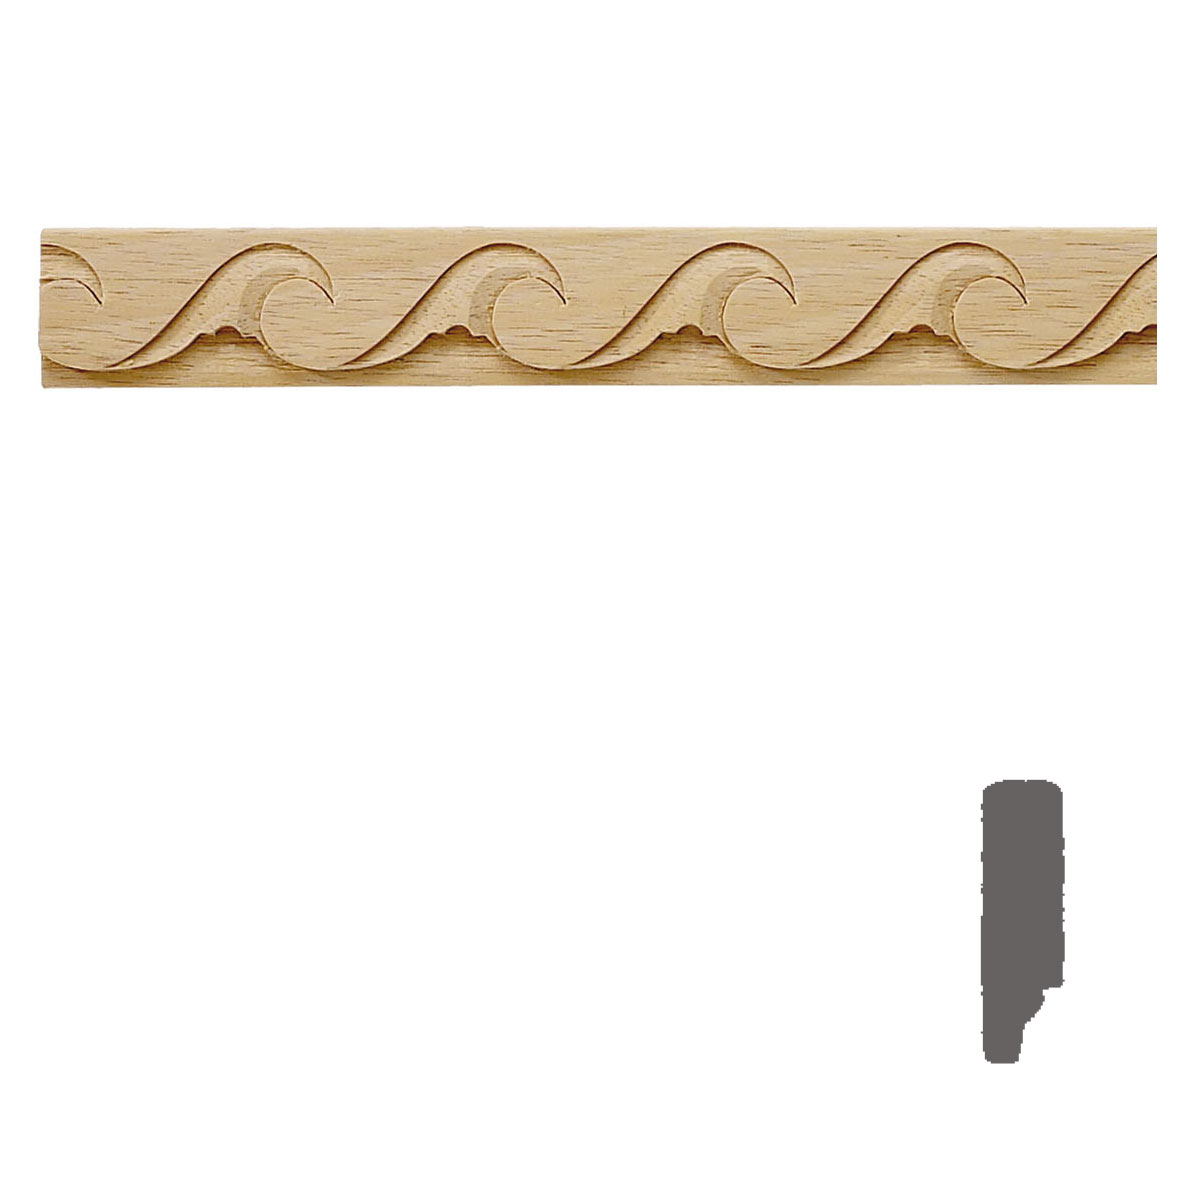 Wood Panel Molding Wave Carved, Decorative Wooden Trim Pieces